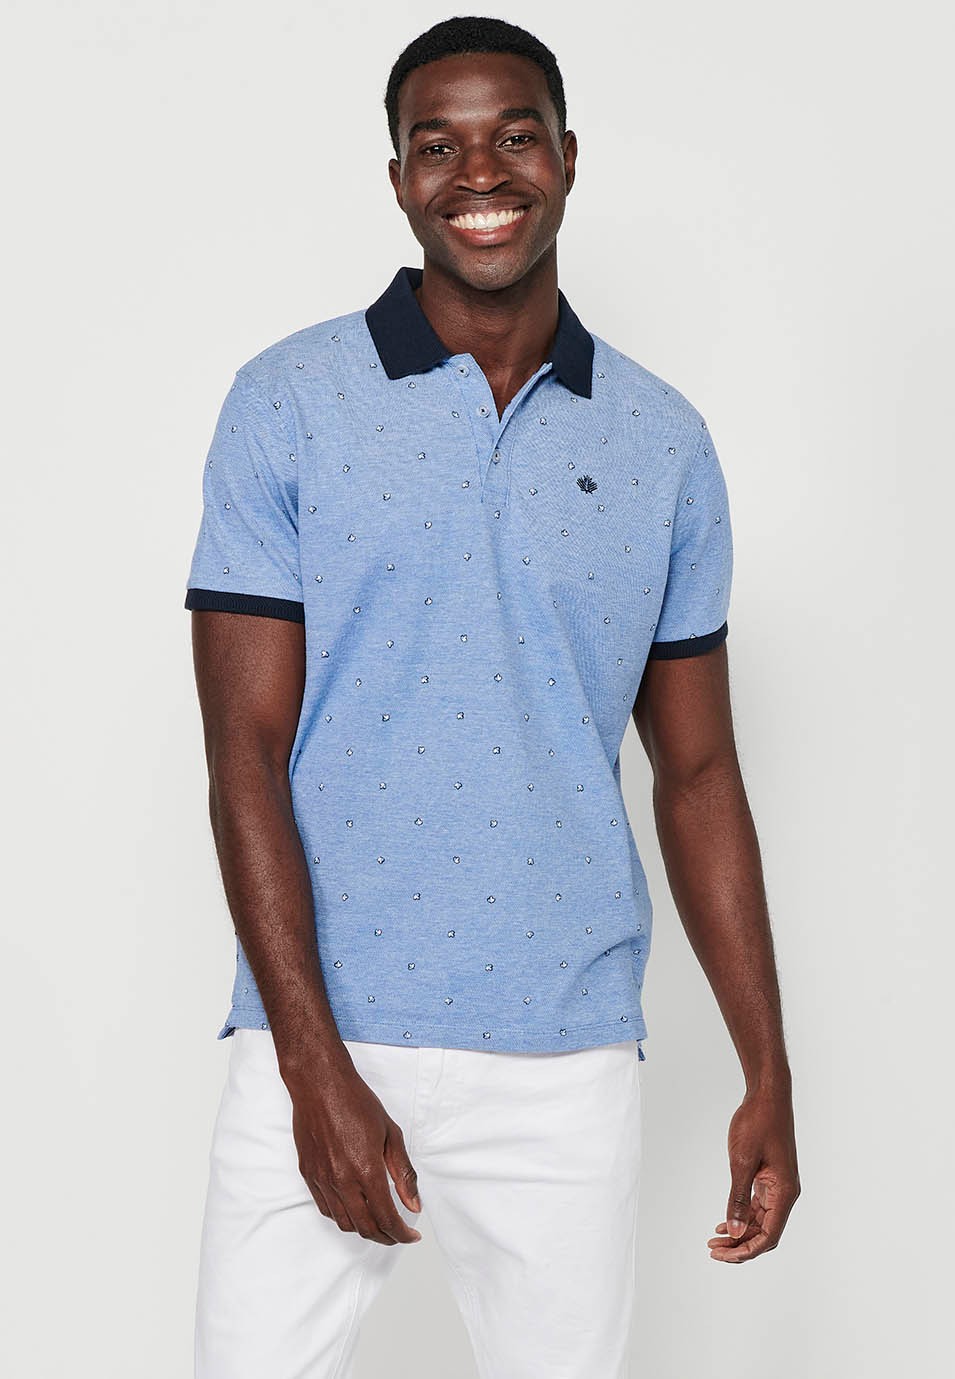 Short-sleeved cotton polo shirt, blue printed fabric for men